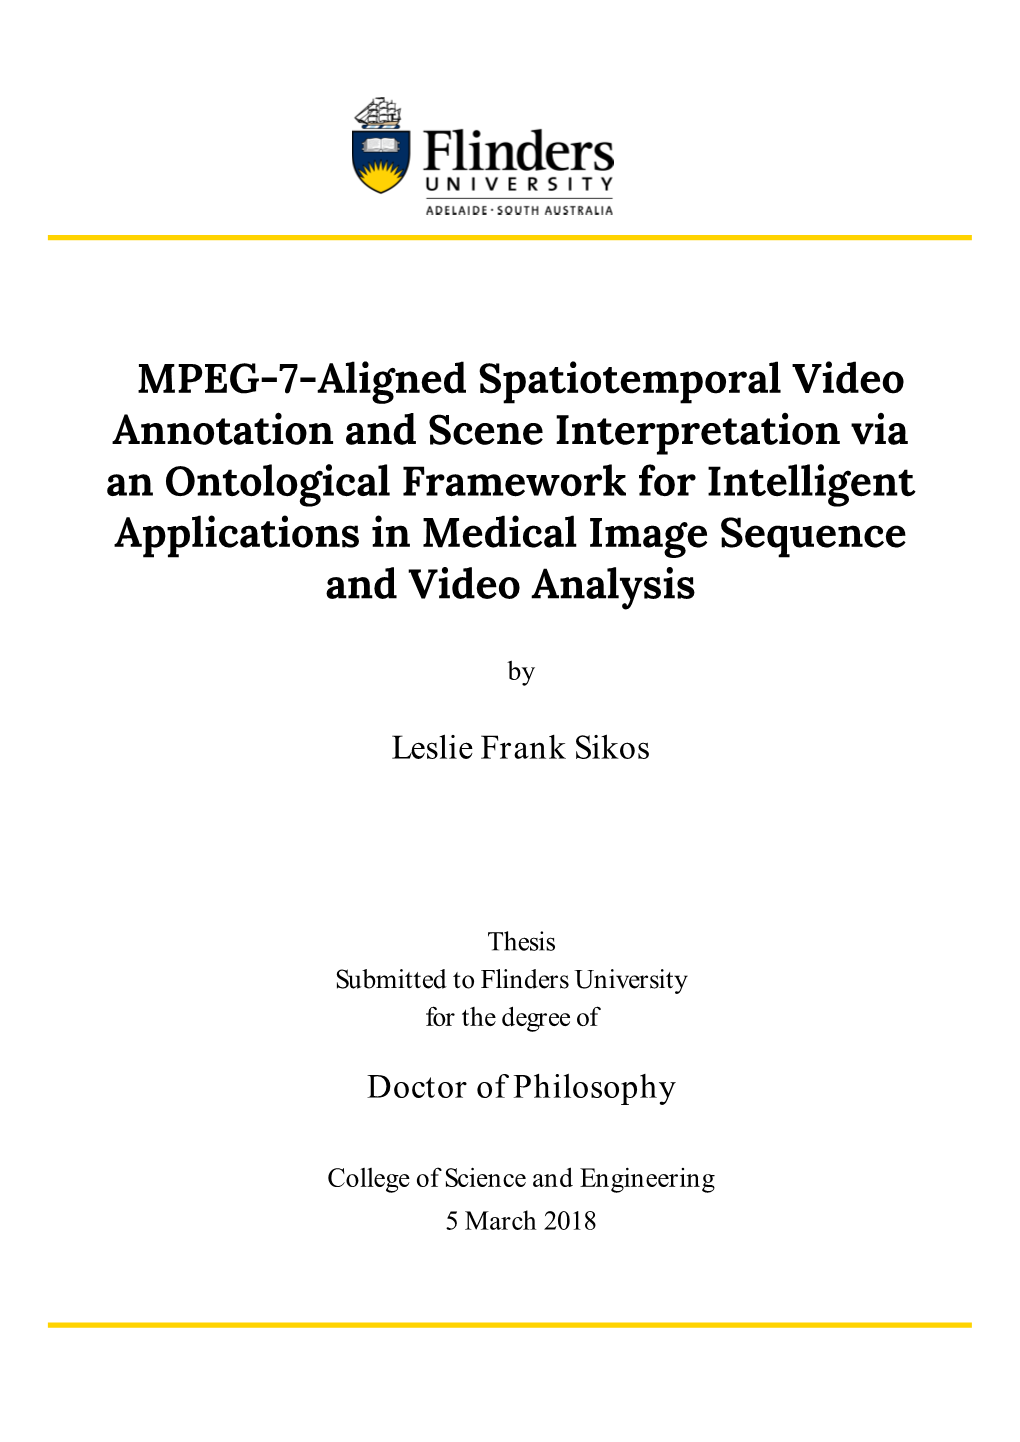 MPEG-7-Aligned Spatiotemporal Video Annotation and Scene